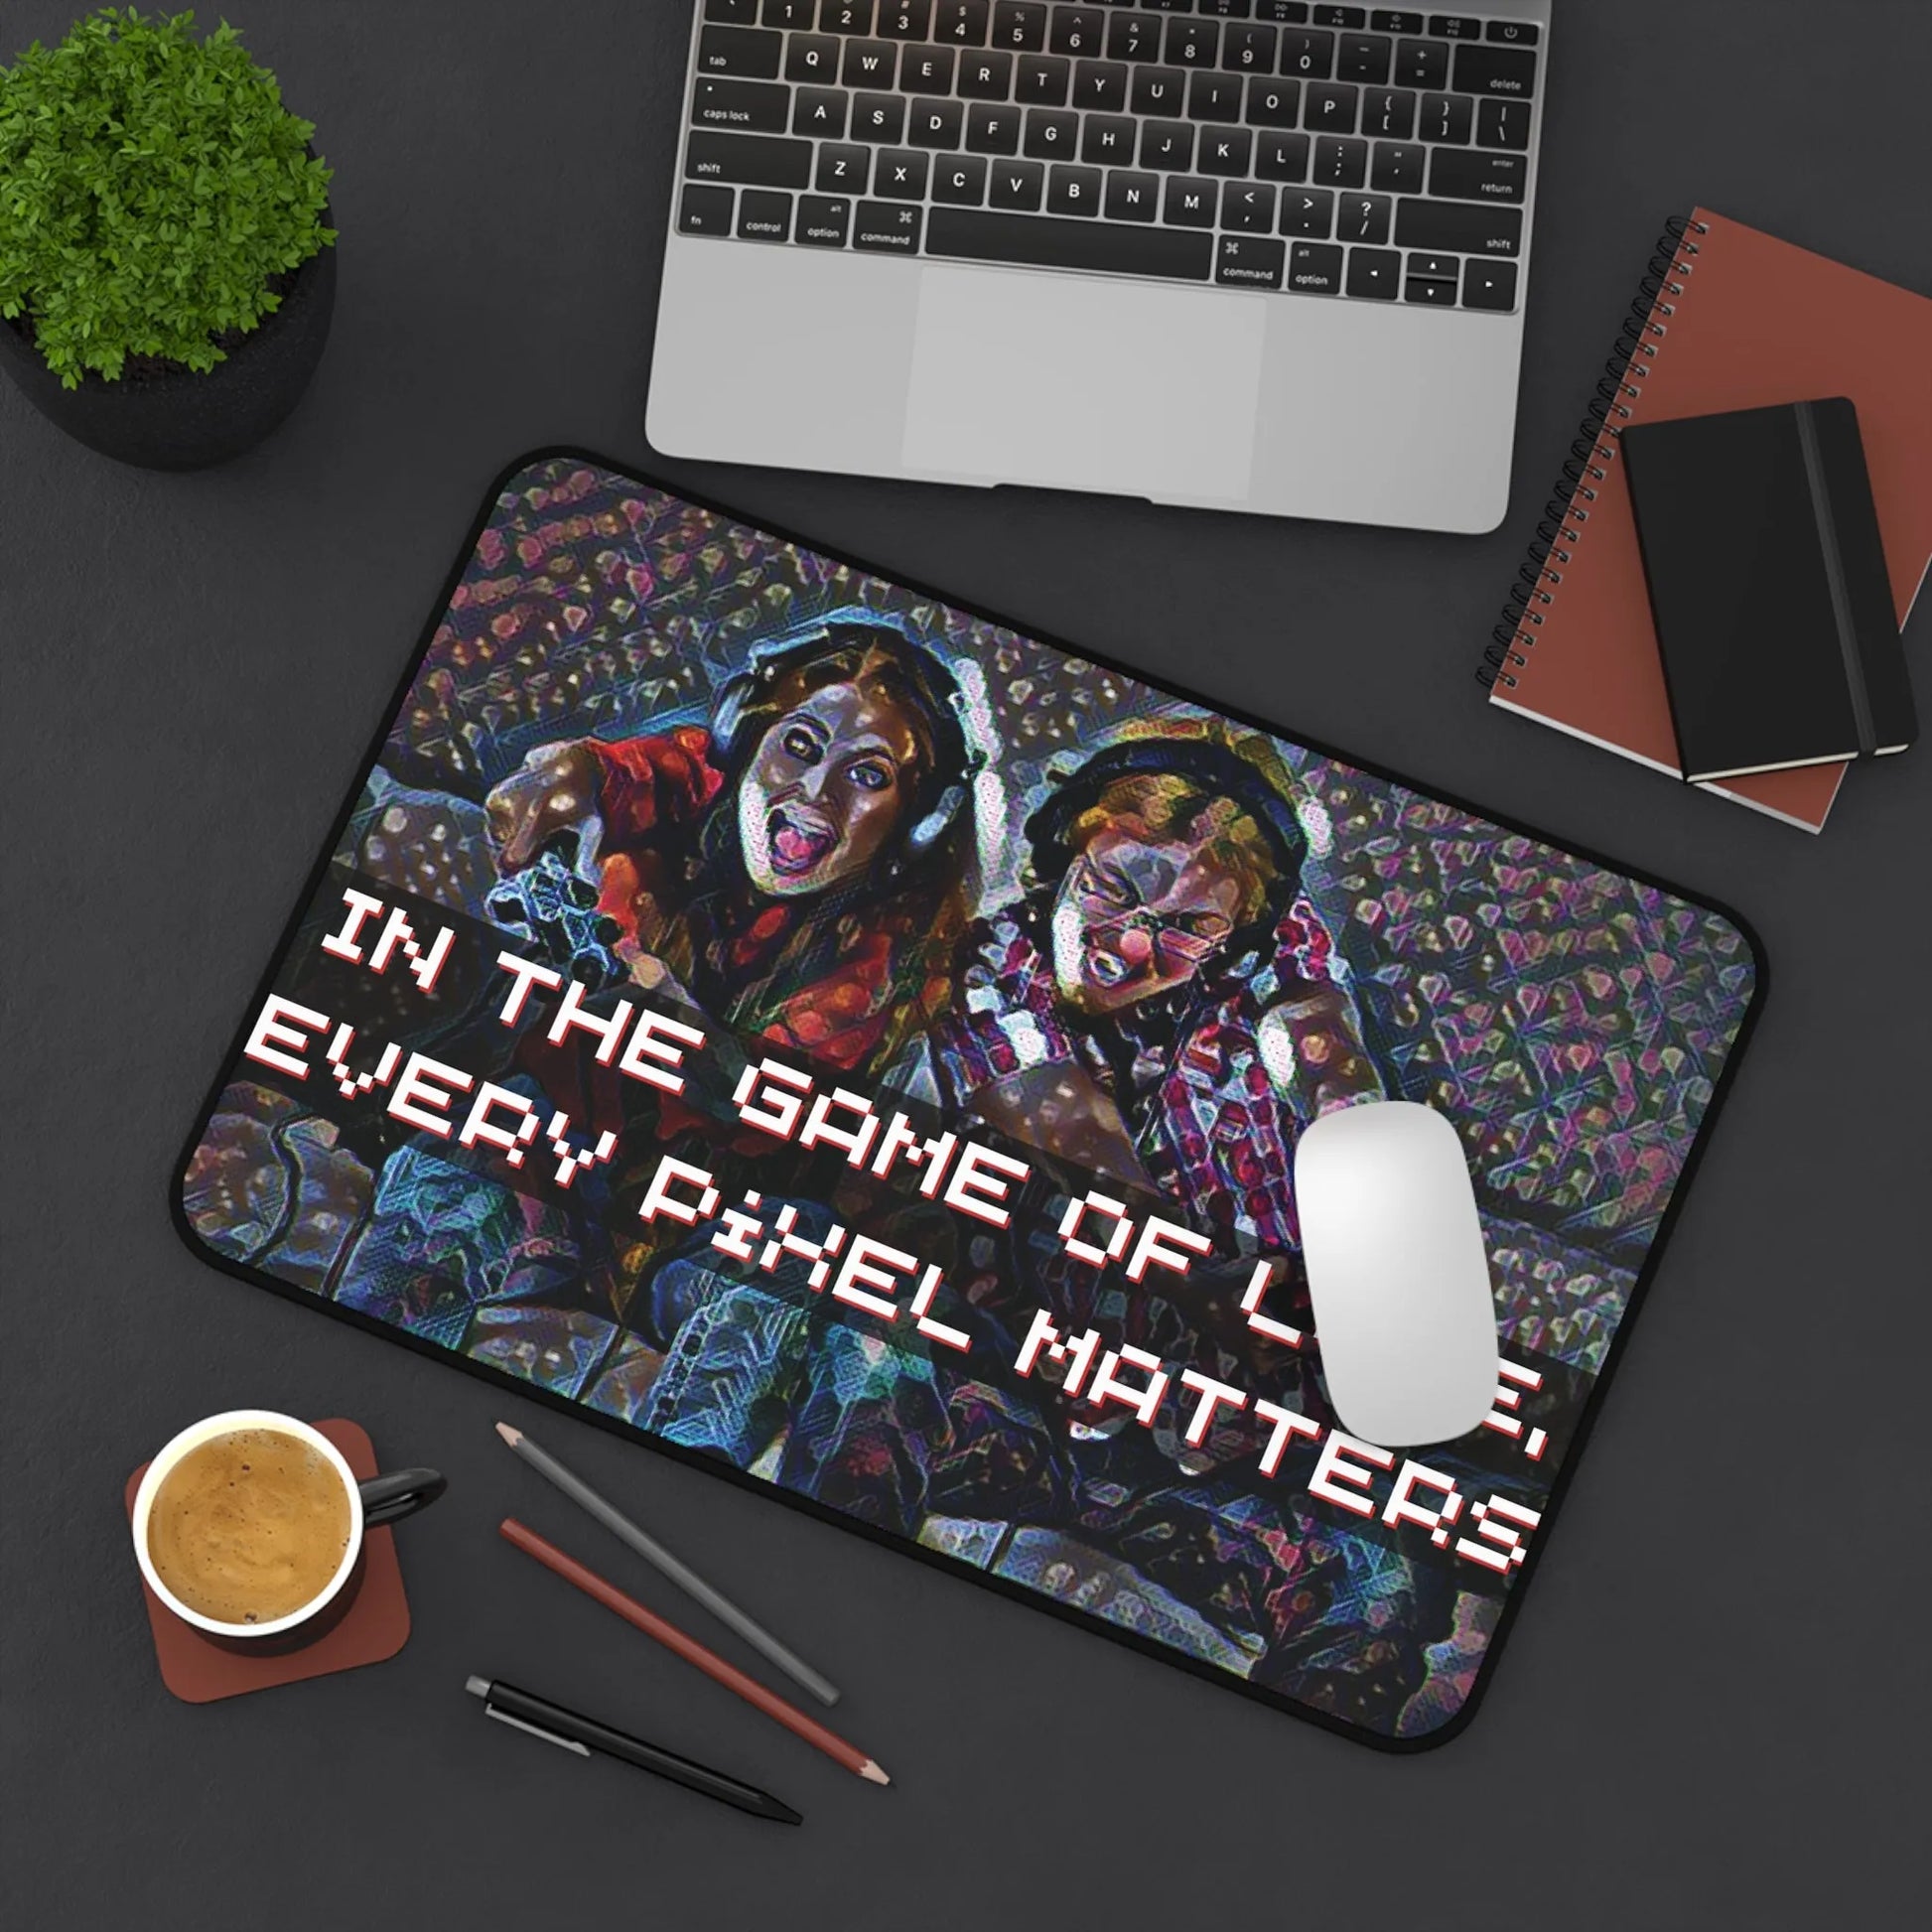 'In The Game Of Love, Every Pixel Matters' Personalized Gaming Photo Desk Mat -  Level Up Your Gaming Space with Customized Gaming Desk Mat – Personalized Style for Avid Gamers medium on desk